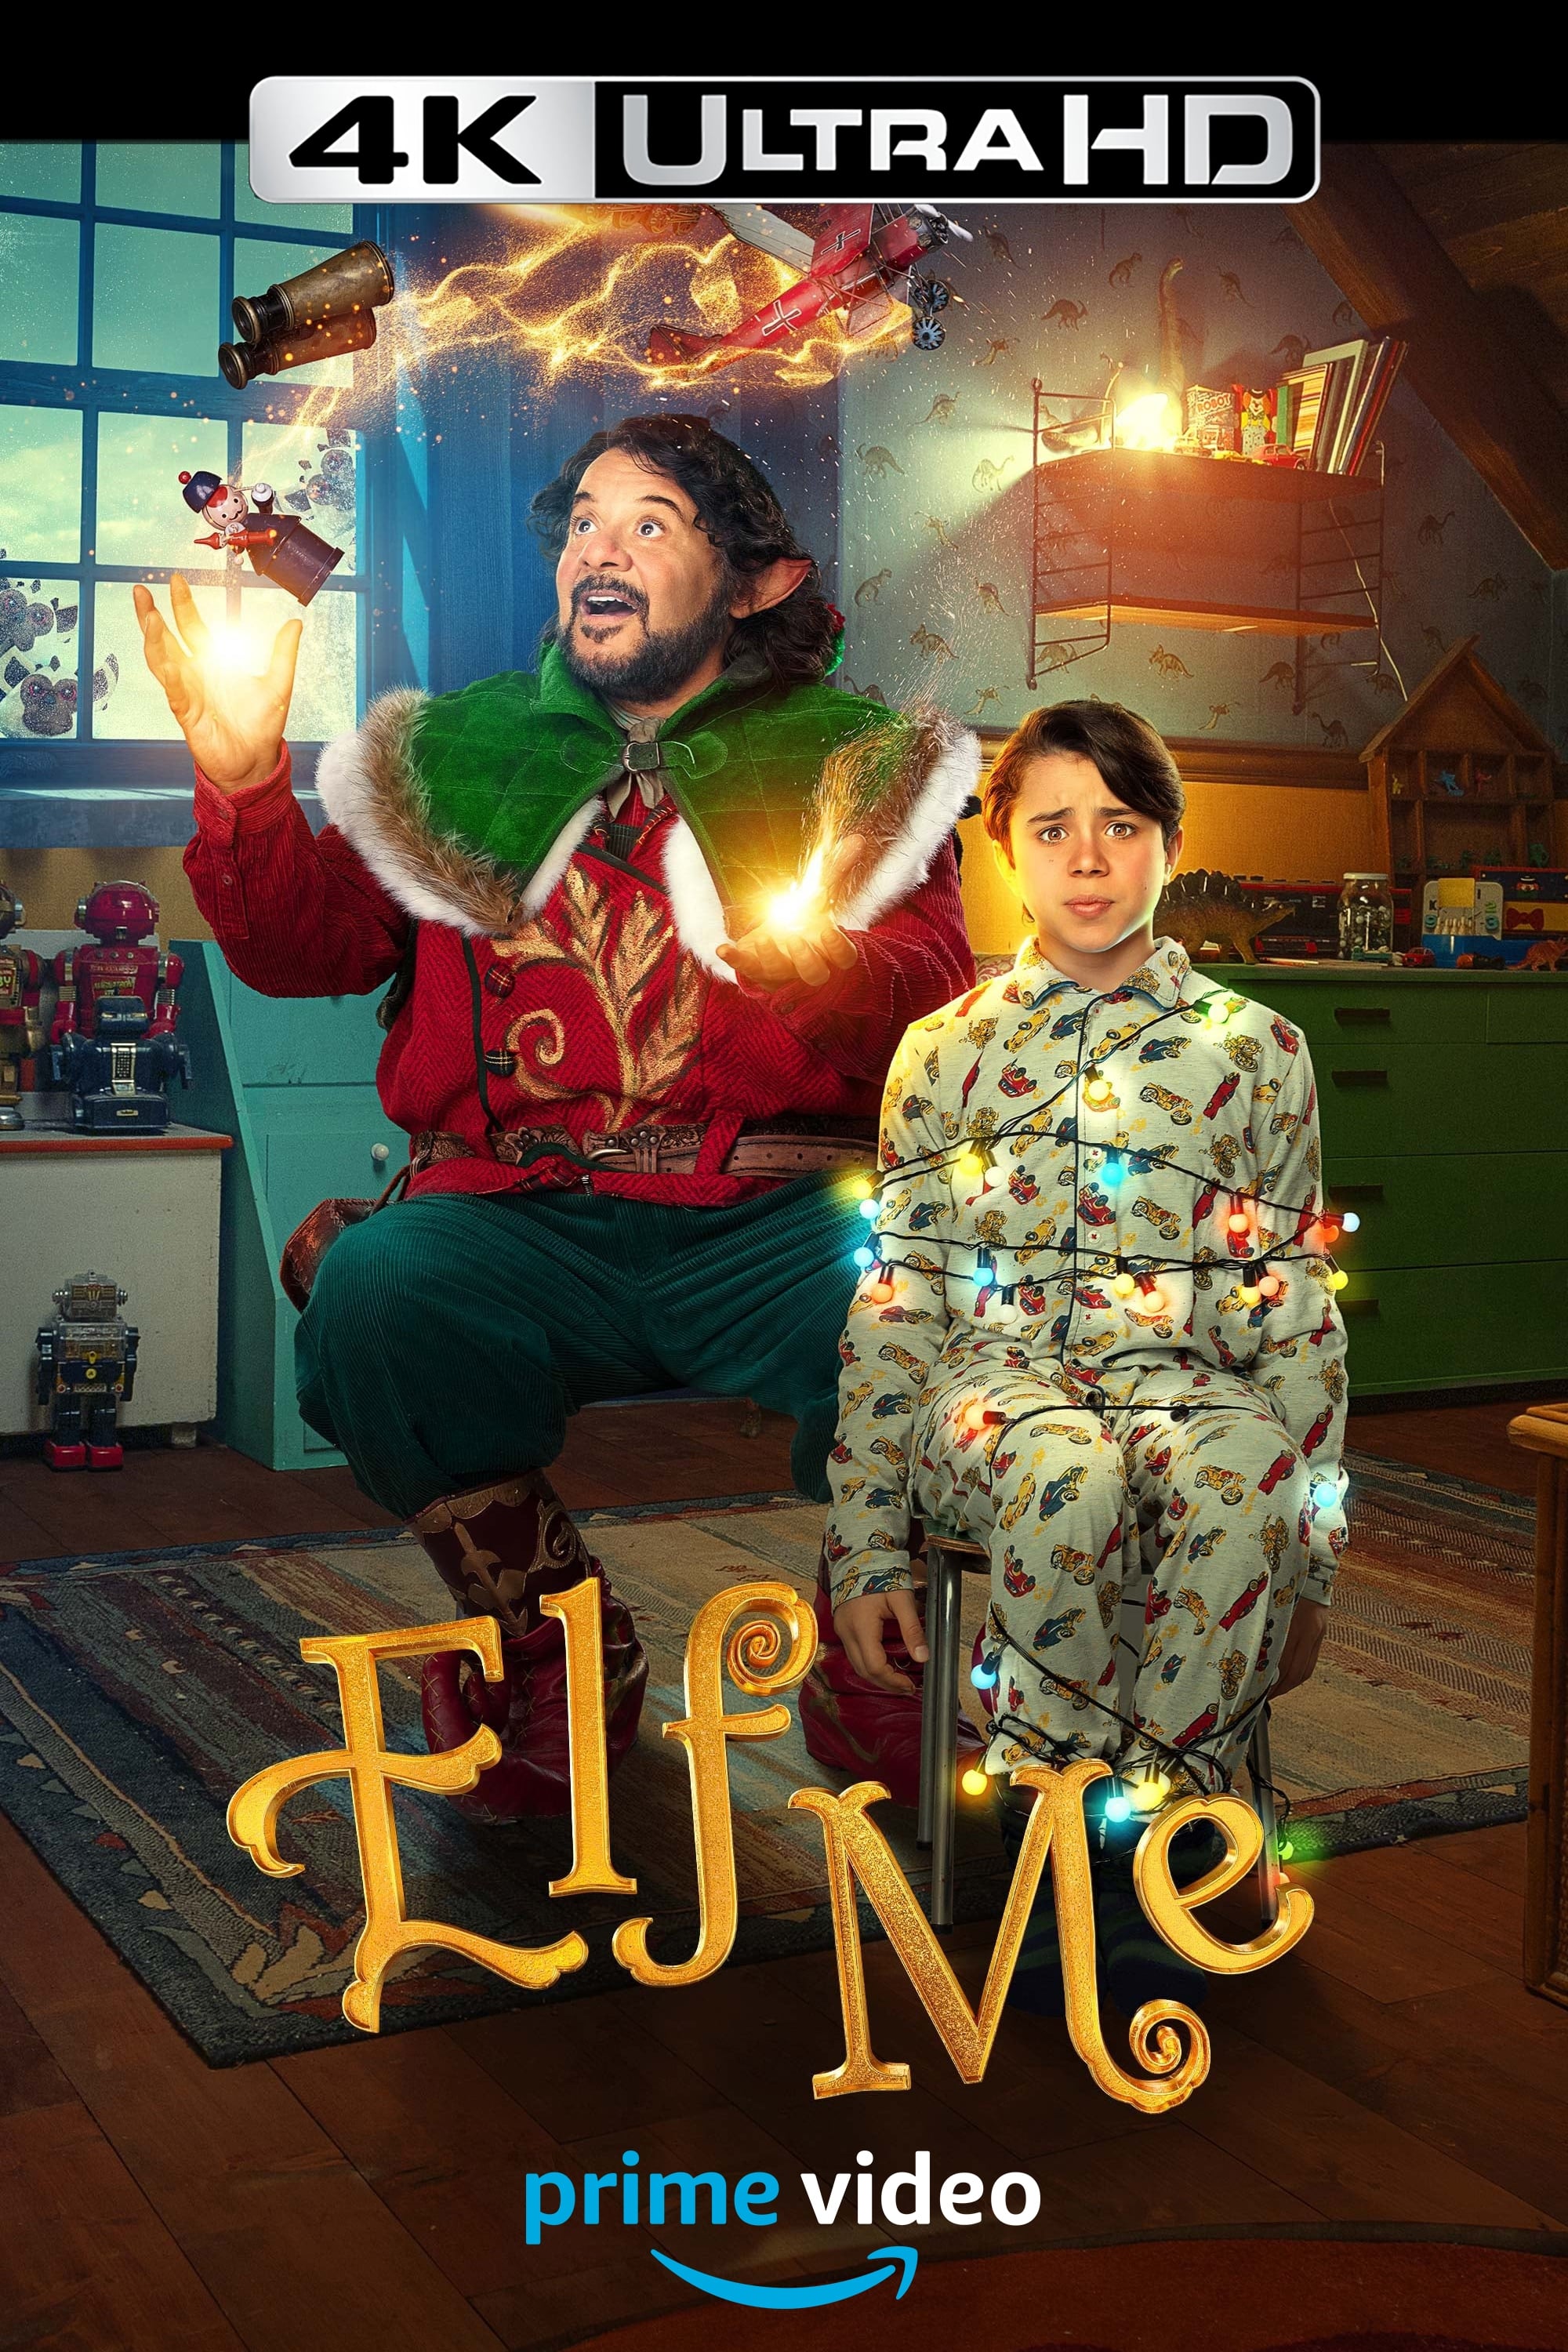 Trip is an unconventional elf. As Santa’s helper, he seems to succeed only in building bizarre weapons rather than toys. Fate will lead him to meet Elia, a shy and unconventional boy pursued by a gang of bullies. The two will help each other and together discover the value of friendship.